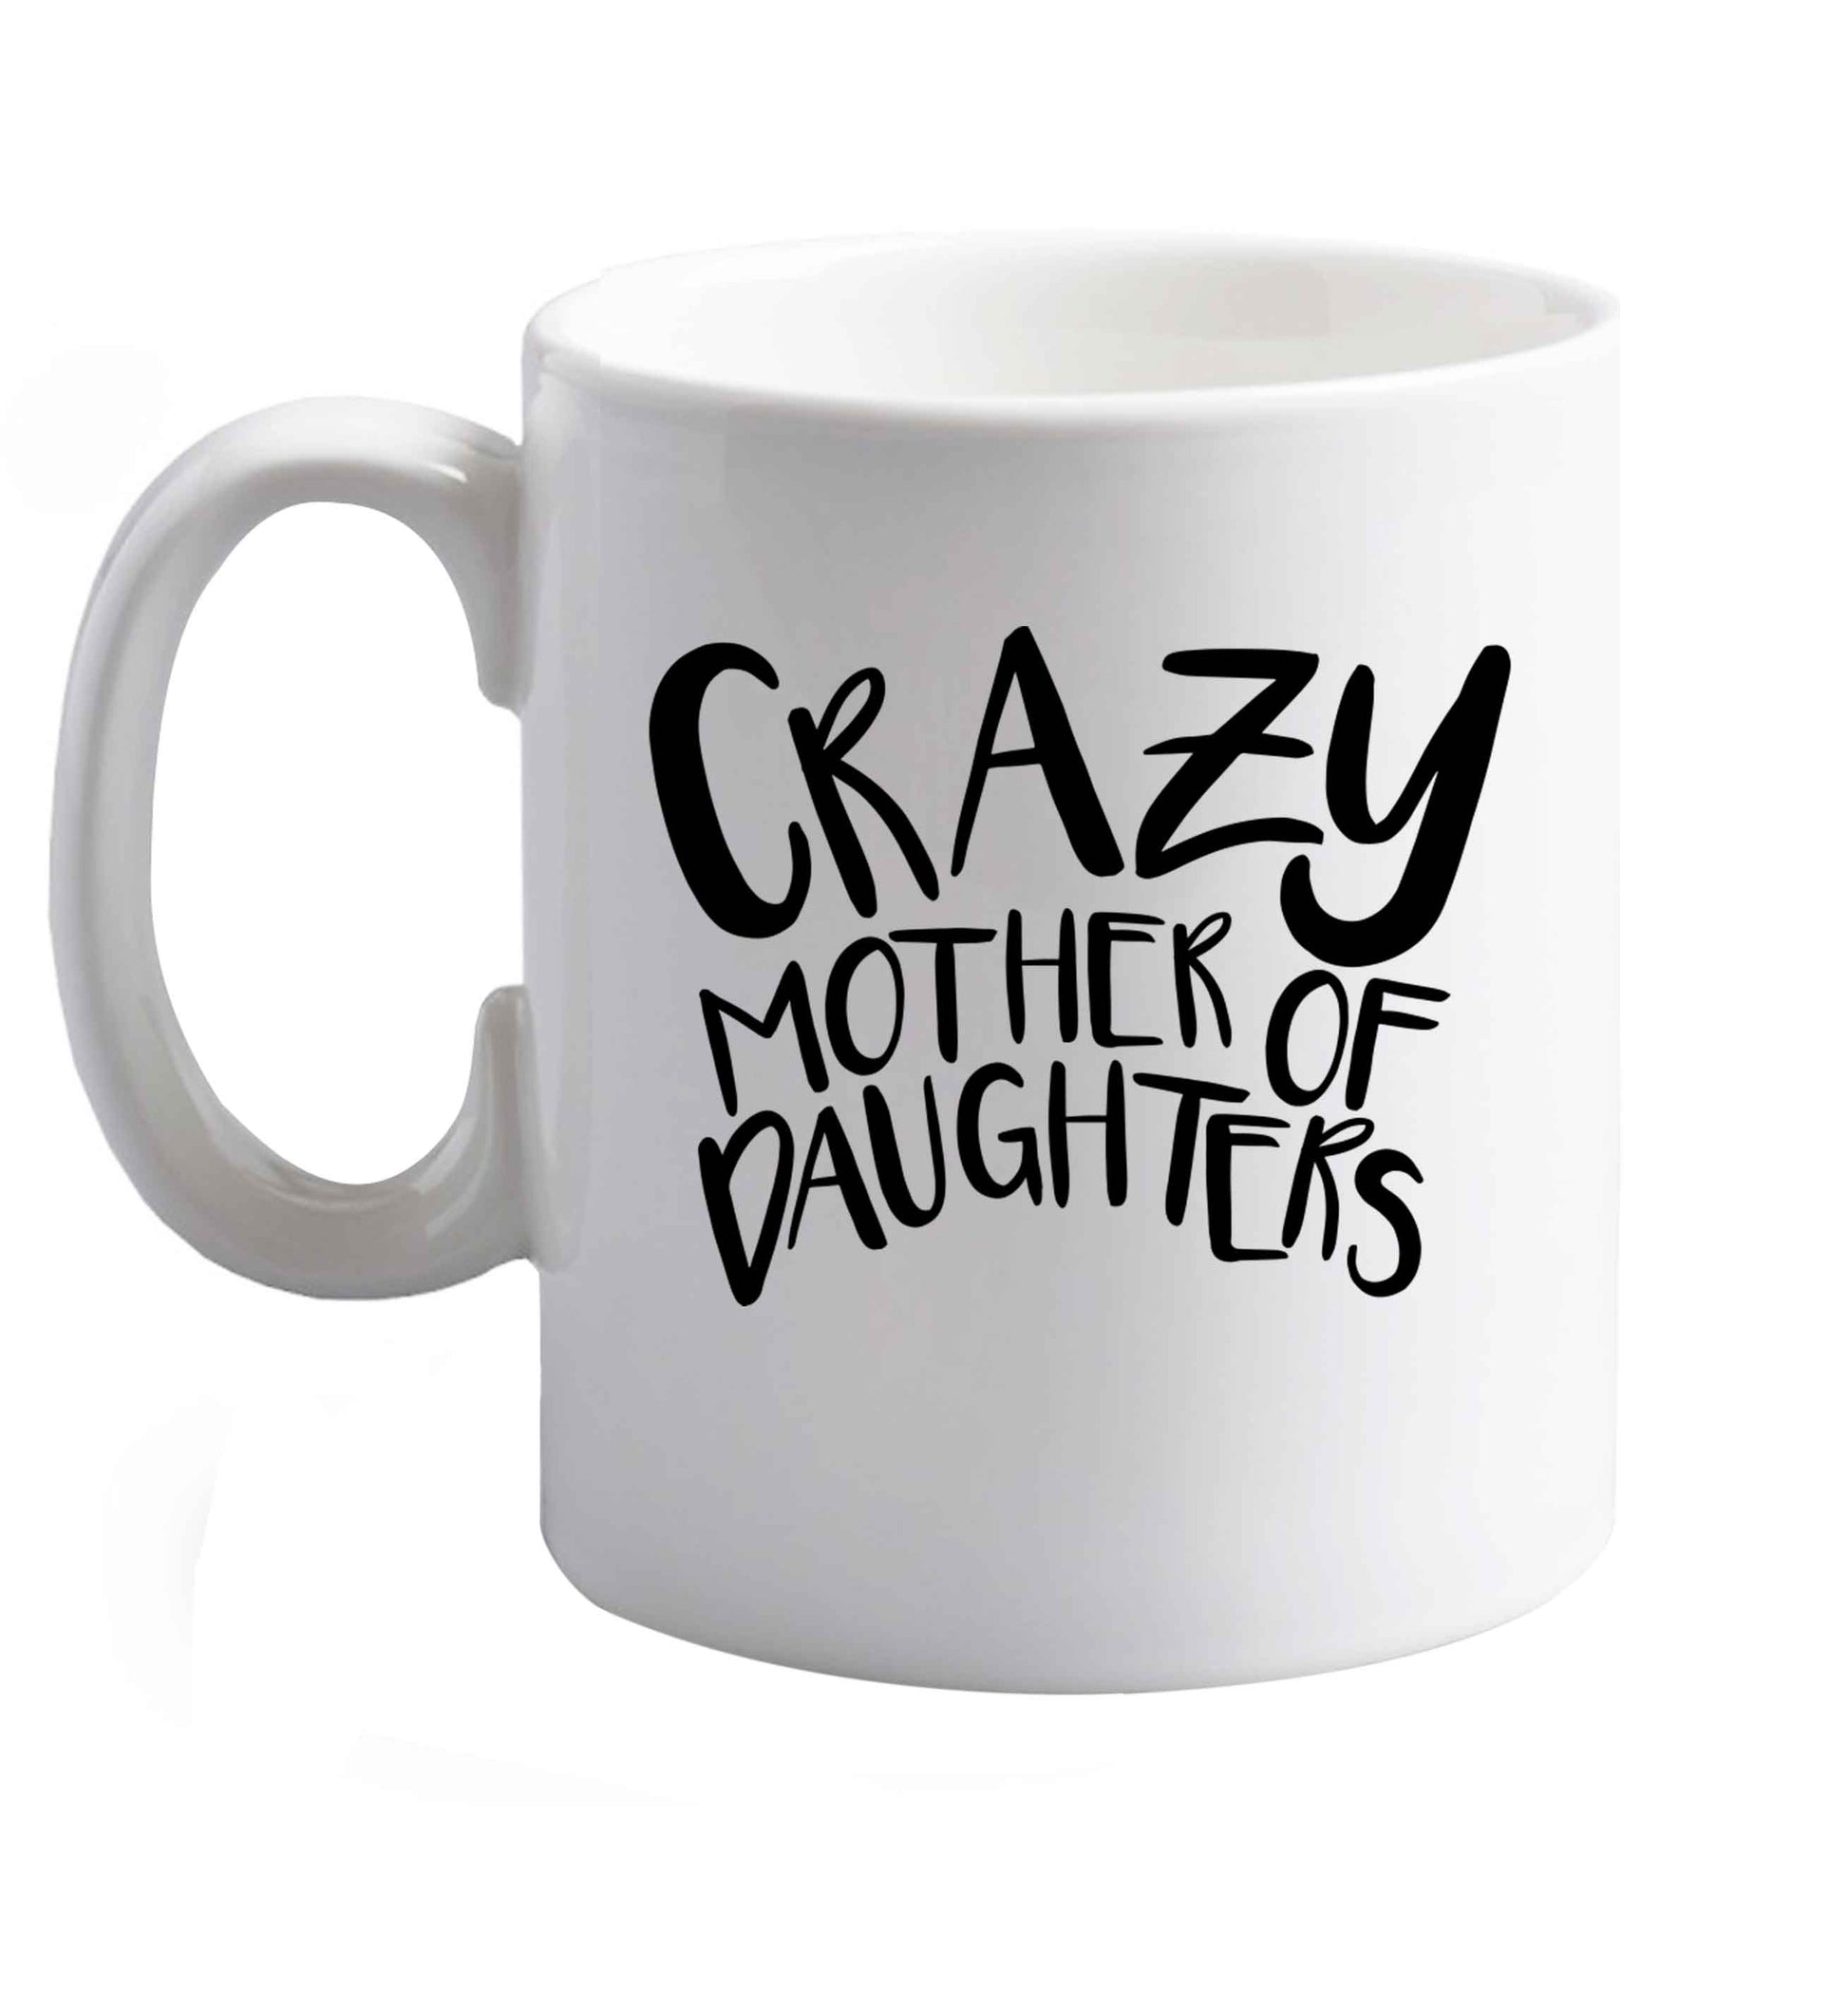 10 oz Crazy mother of daughters ceramic mug right handed